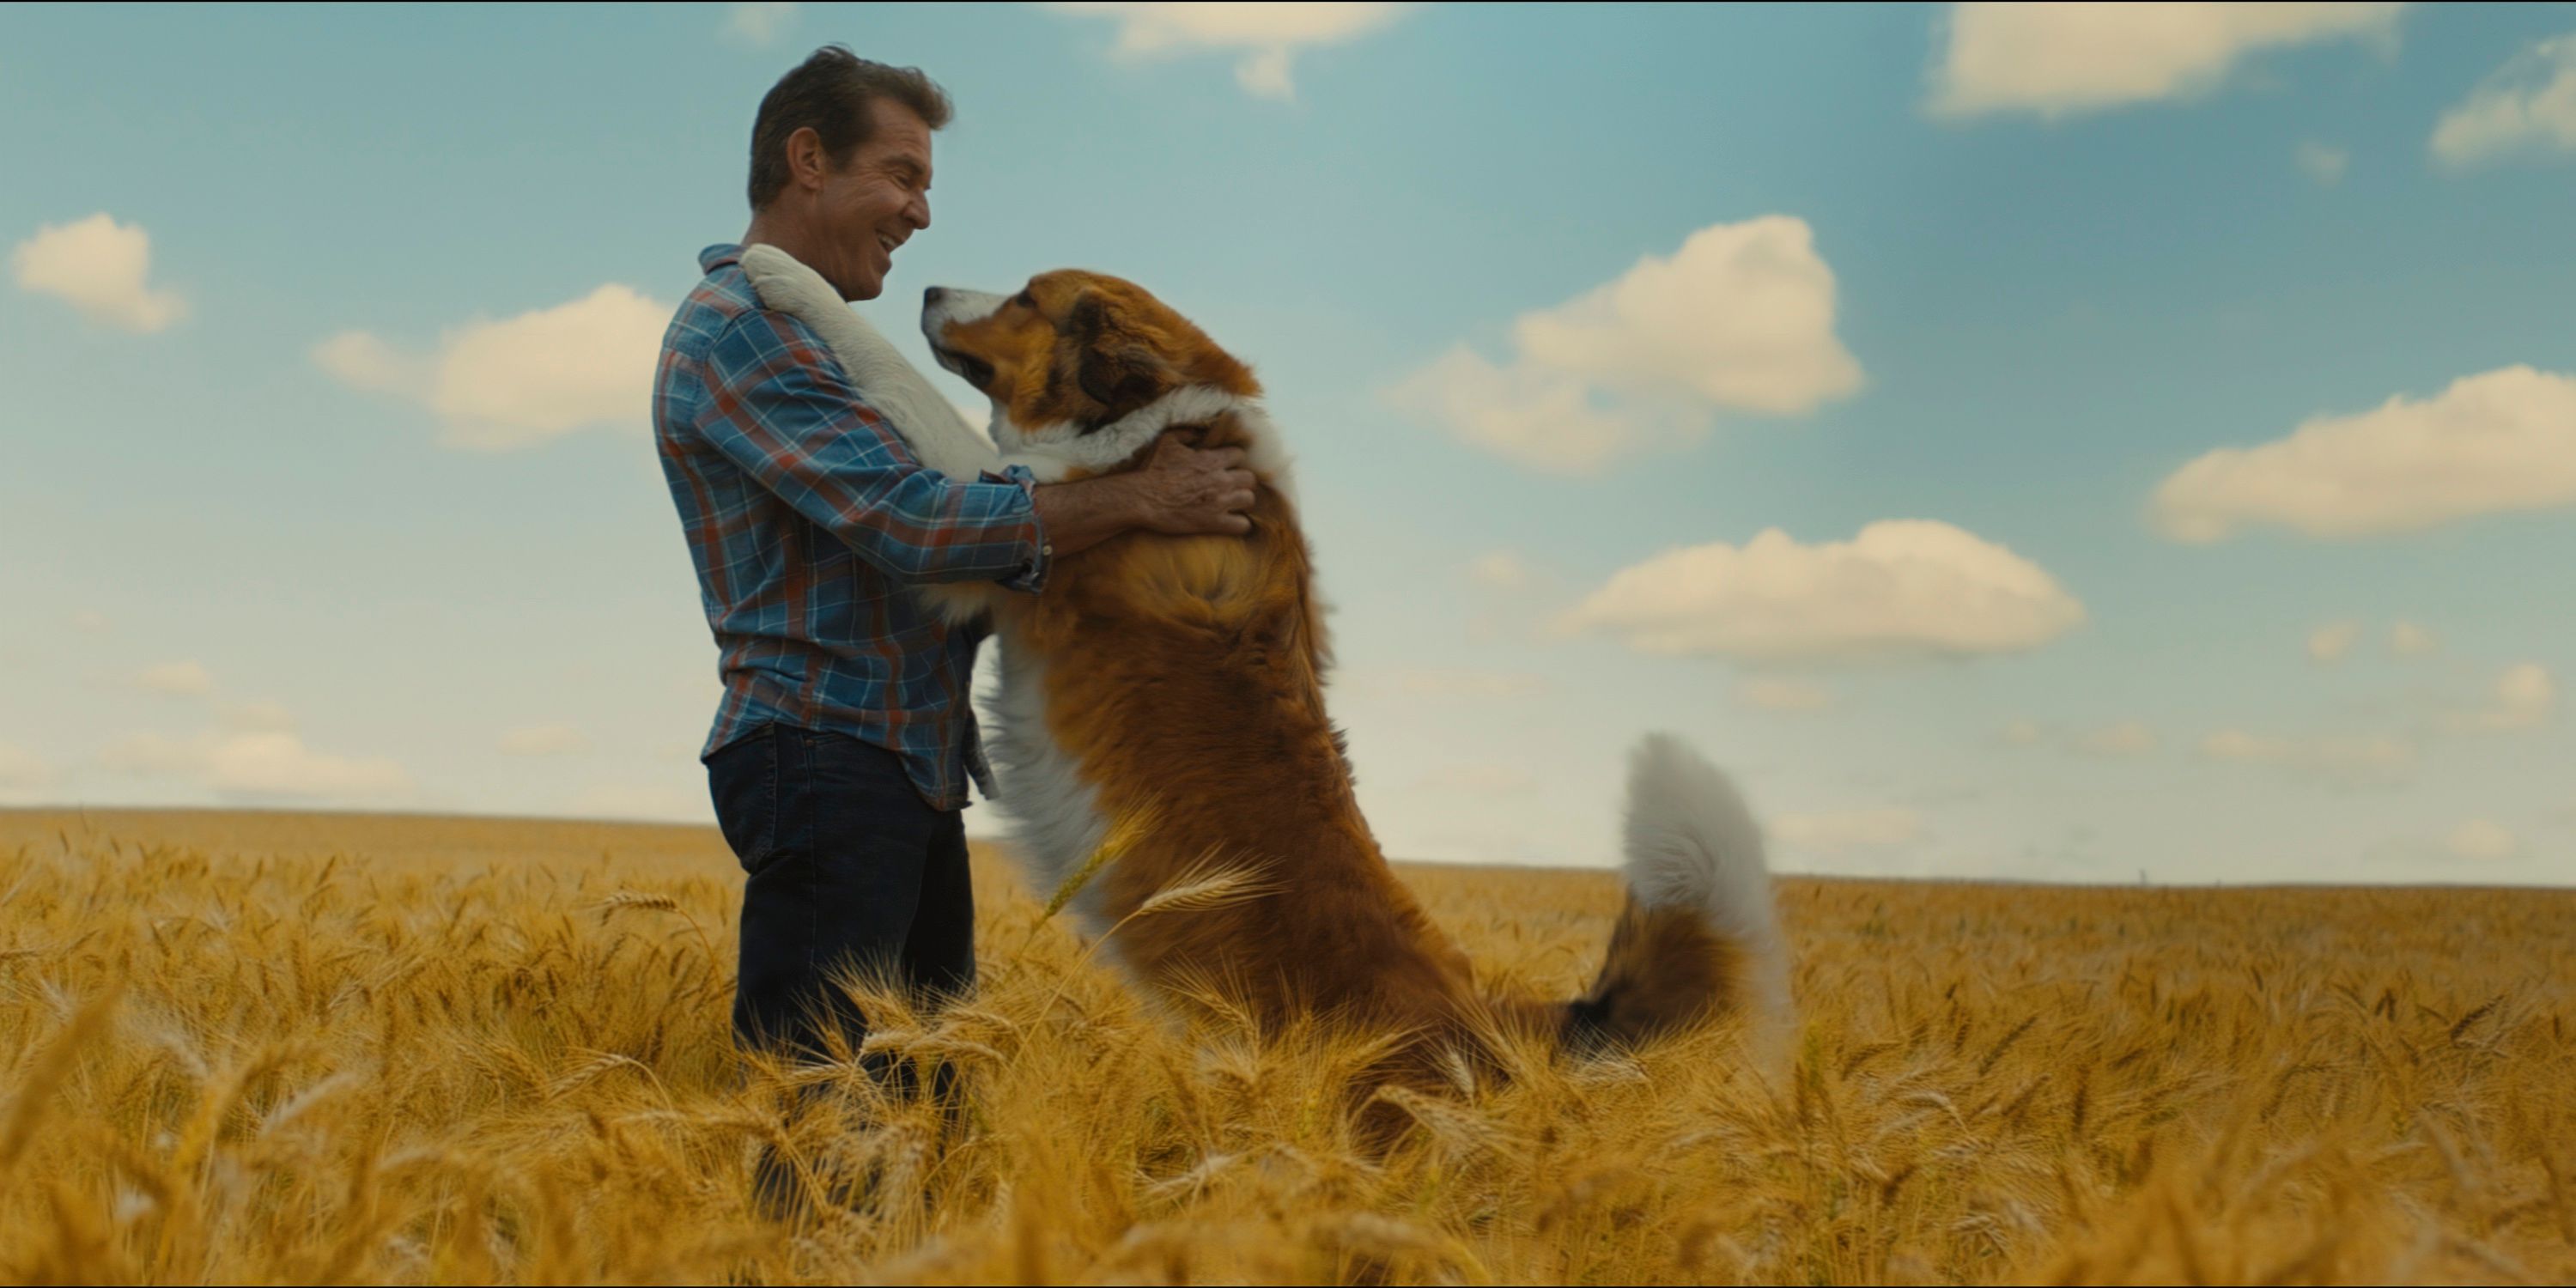 Dennis Quaid as Ethan and Bailey in A Dog's Journey